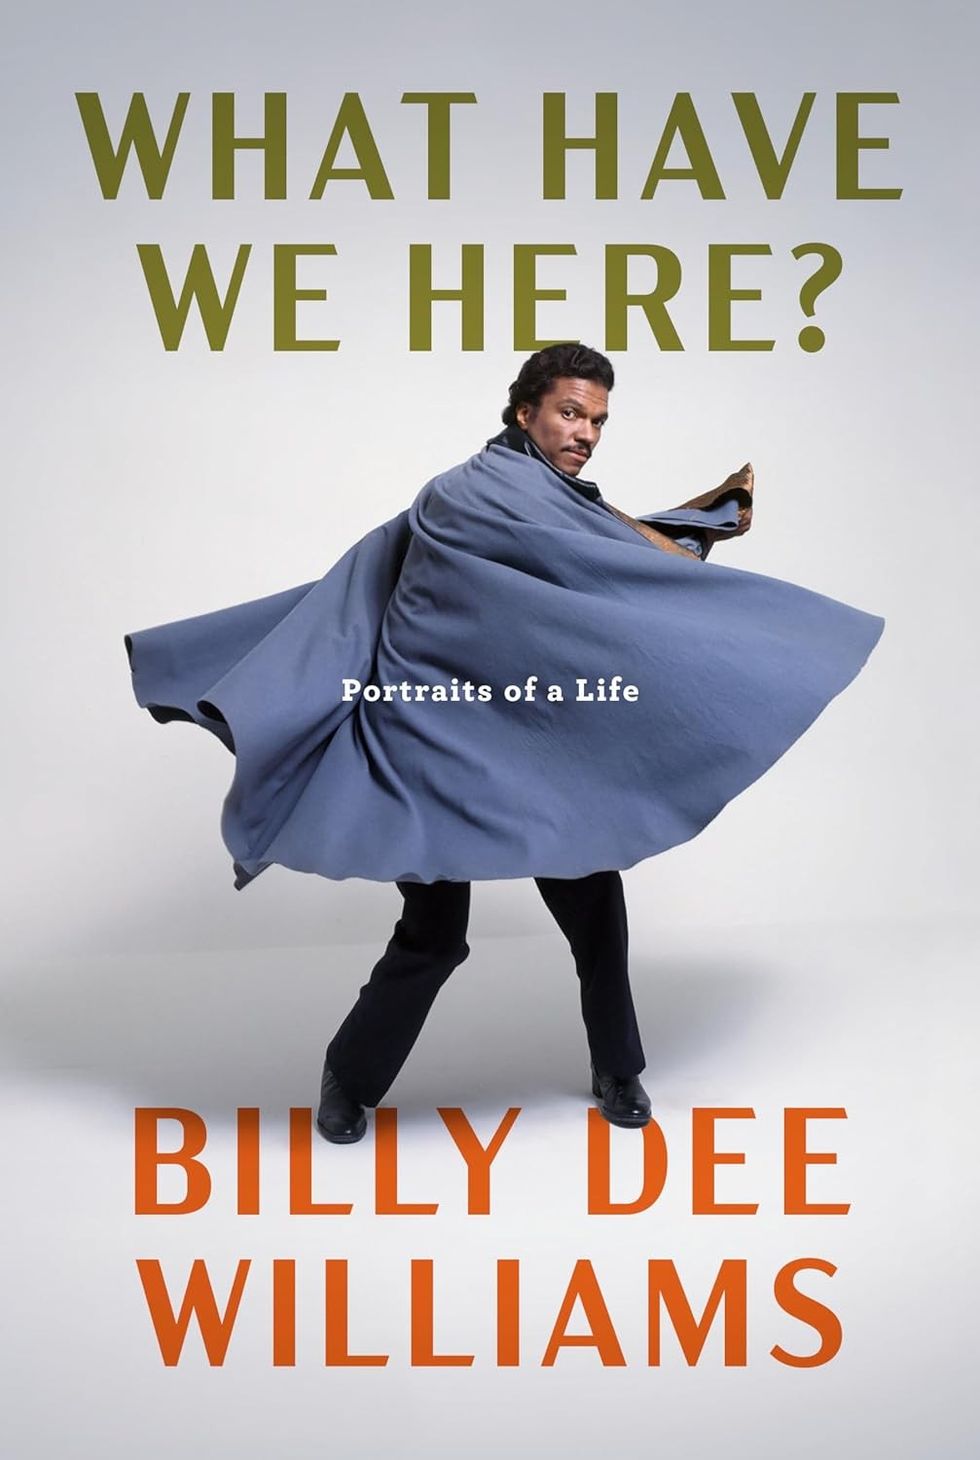 \u200bWhat Have We Here?: Portraits of a Life by Billy Dee Williams